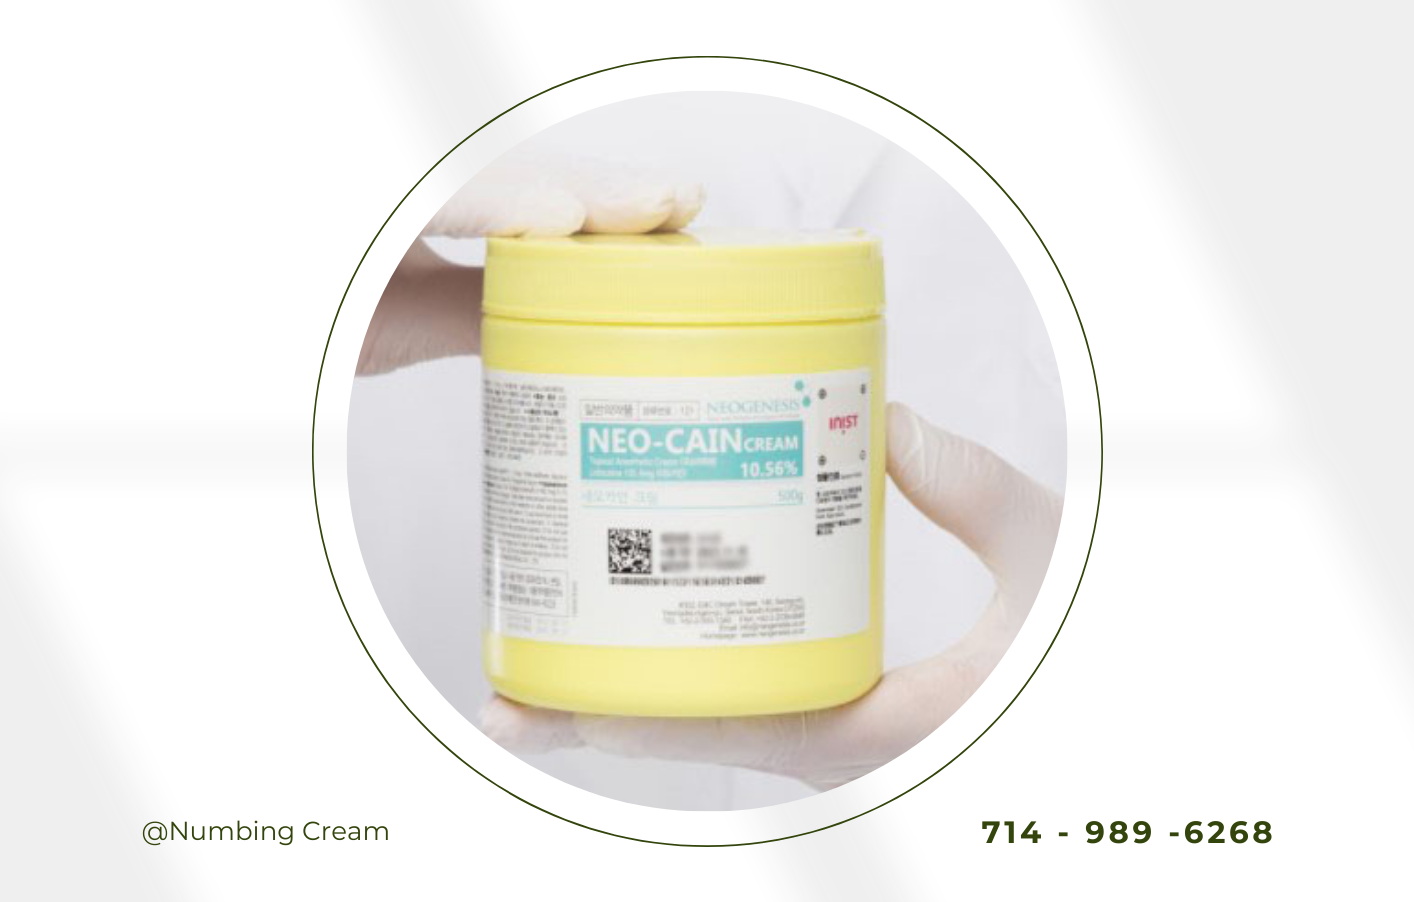 Where to buy Rapid and Effective Lidocaine 10.56% (Neo-Cain Cream) Neo-Cain is now available with the big size (500g) at The Aura Beauty.